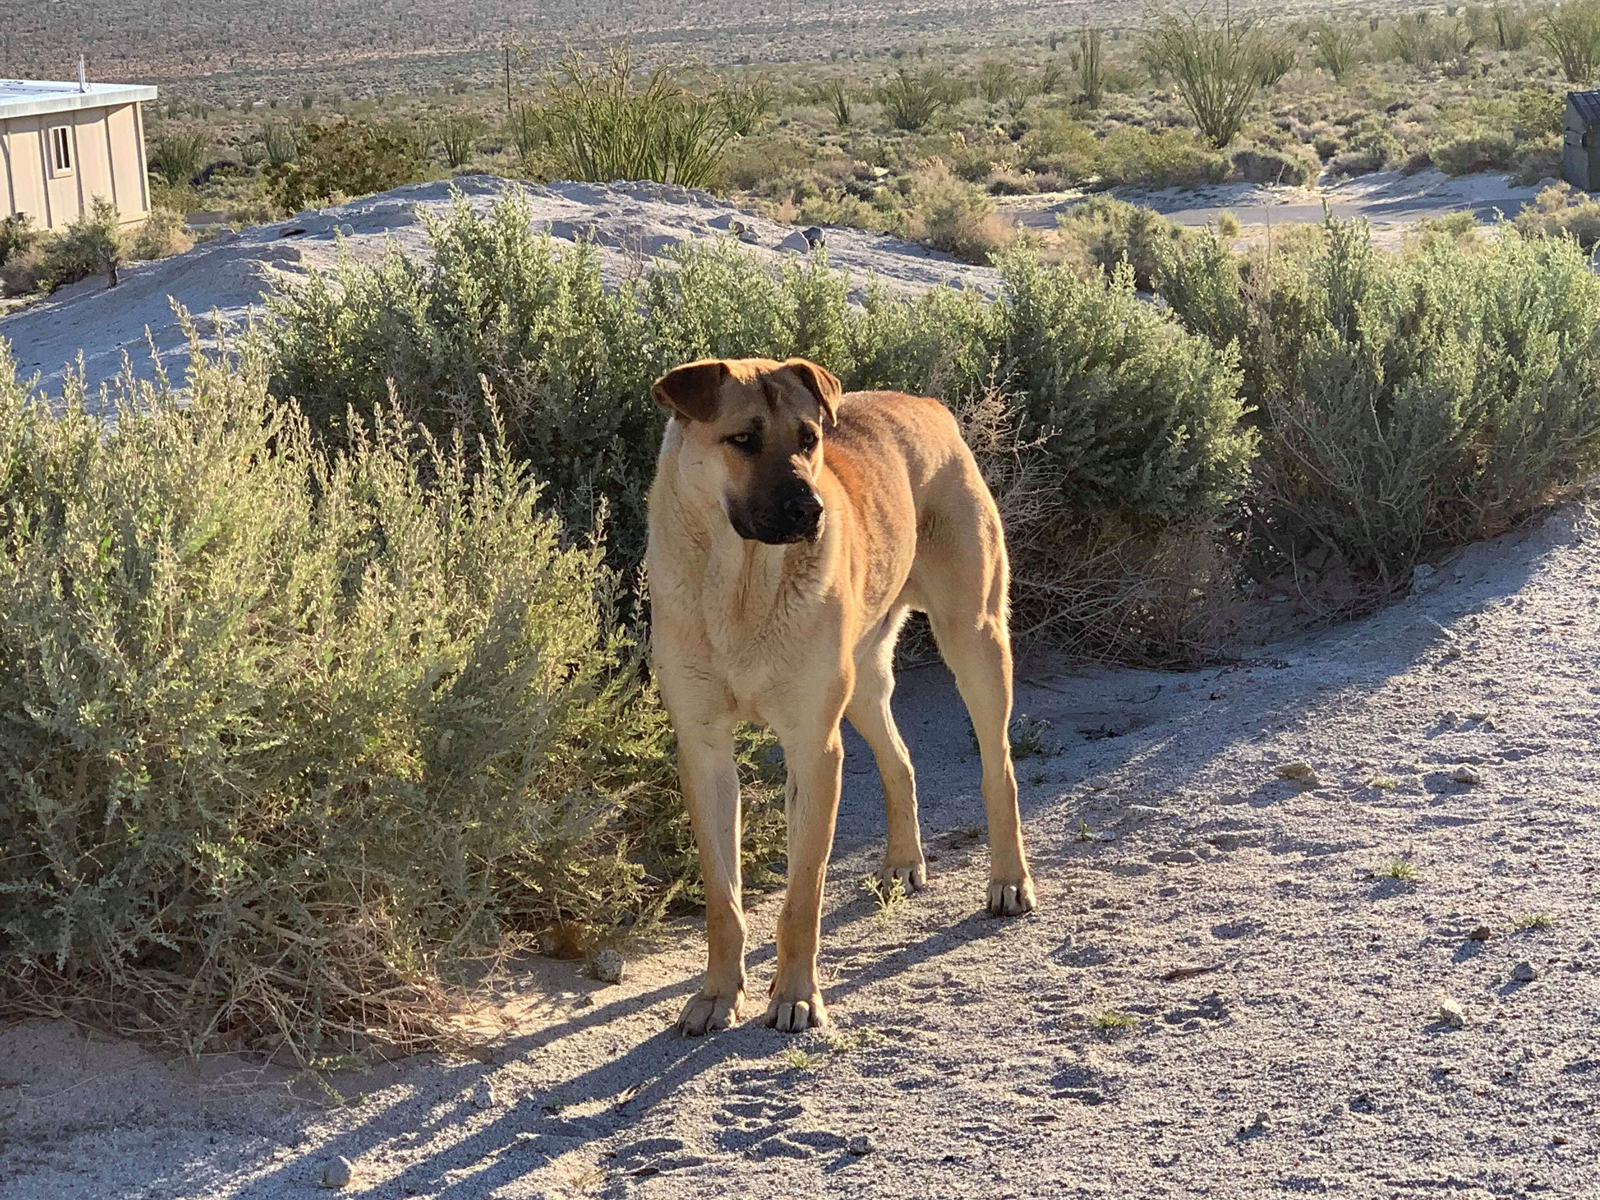 Bruno was captured at Agua Caliente County Park